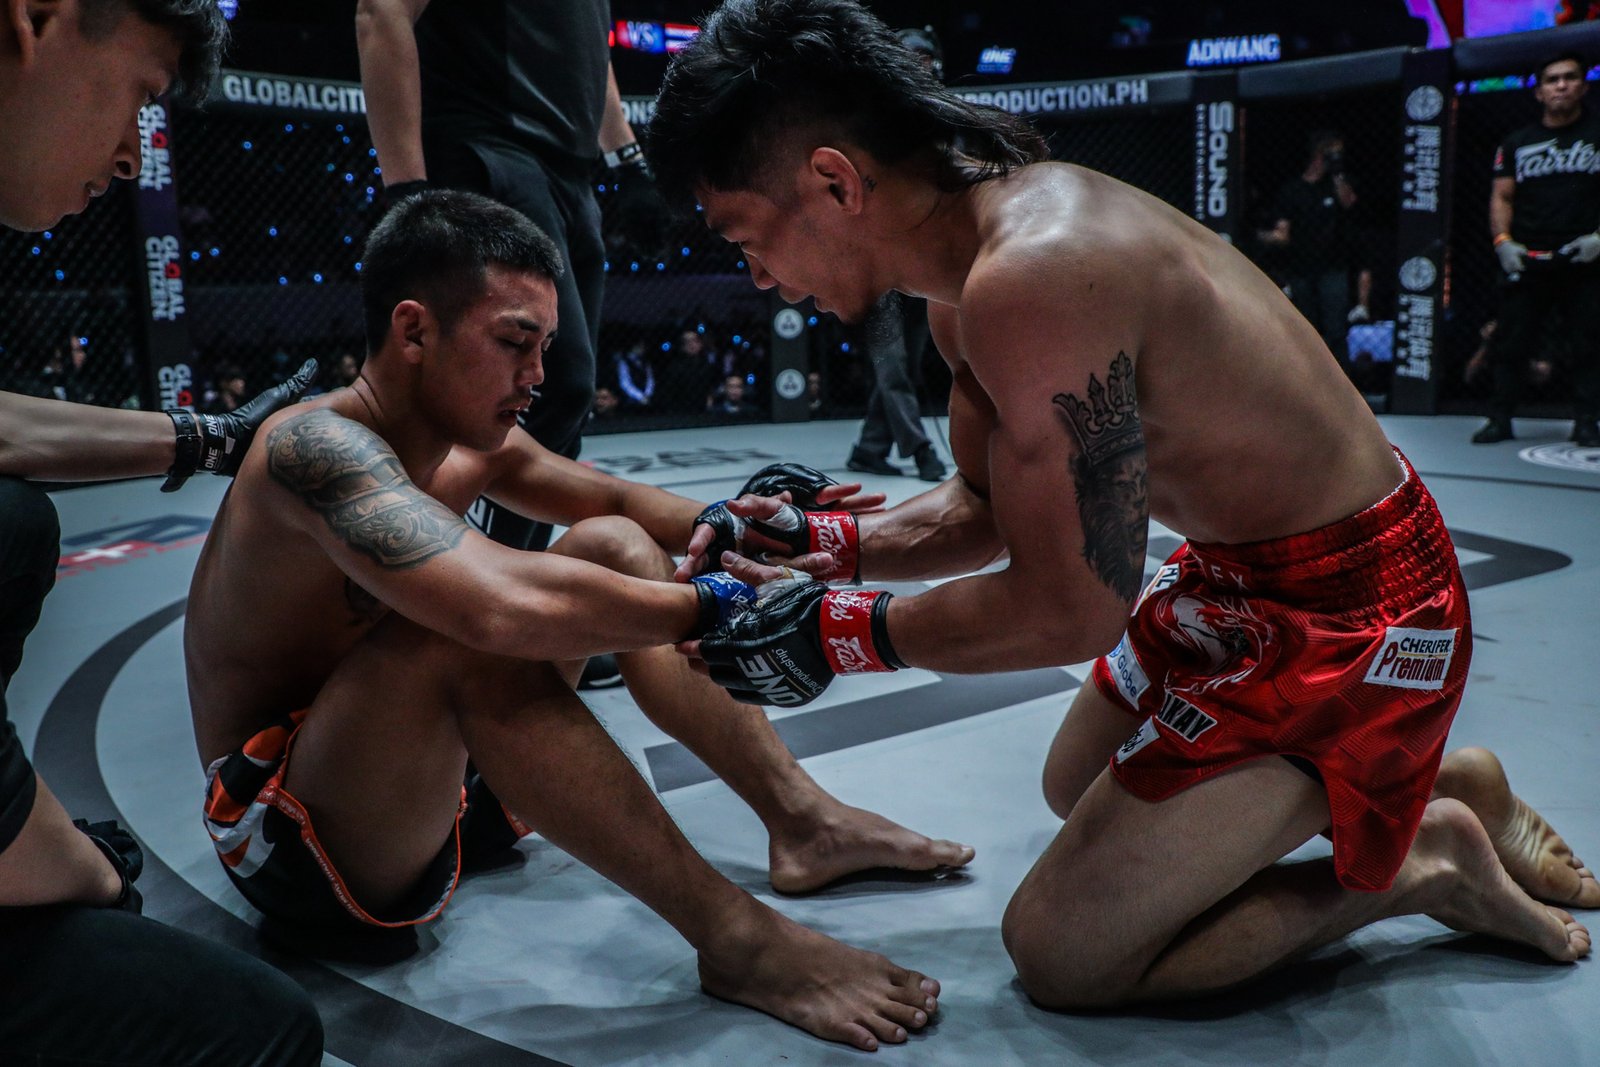 ONE Championship: Adiwang can relate to Johnny Lawrence of ‘Cobra Kai’